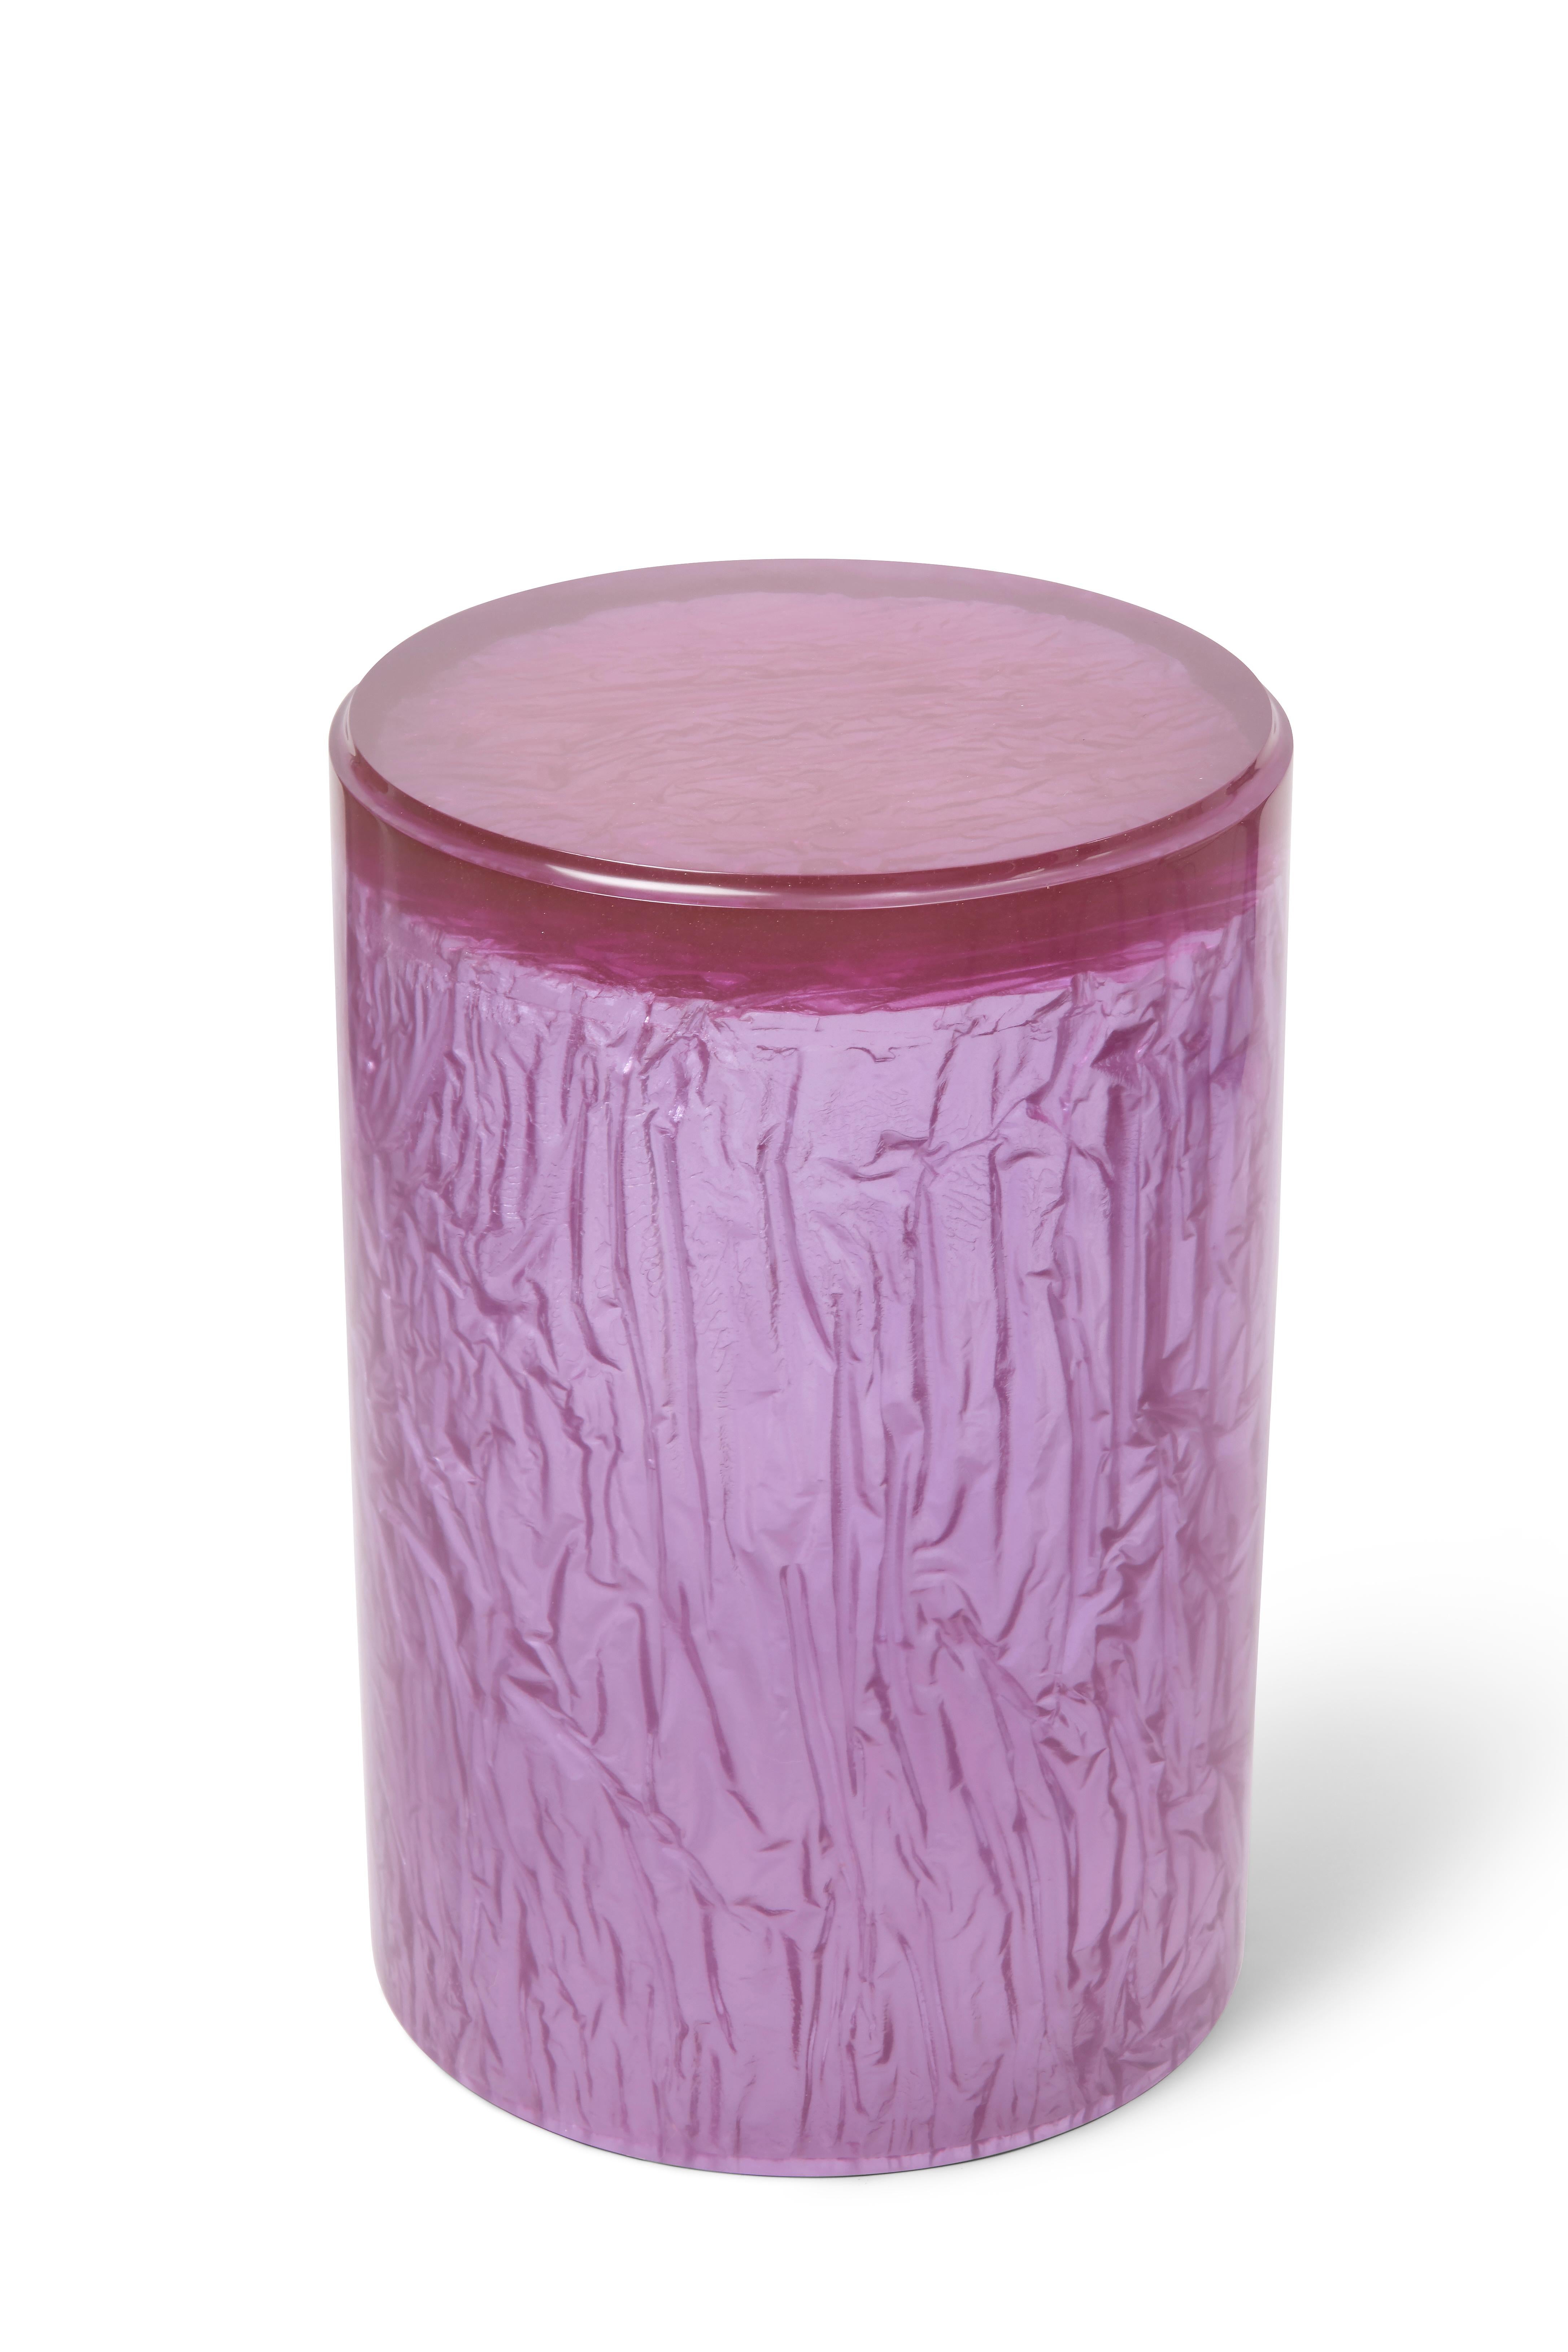 Cast Contemporary Resin Acrylic Side Table or Stool by Natalie Tredgett, gloss Purple